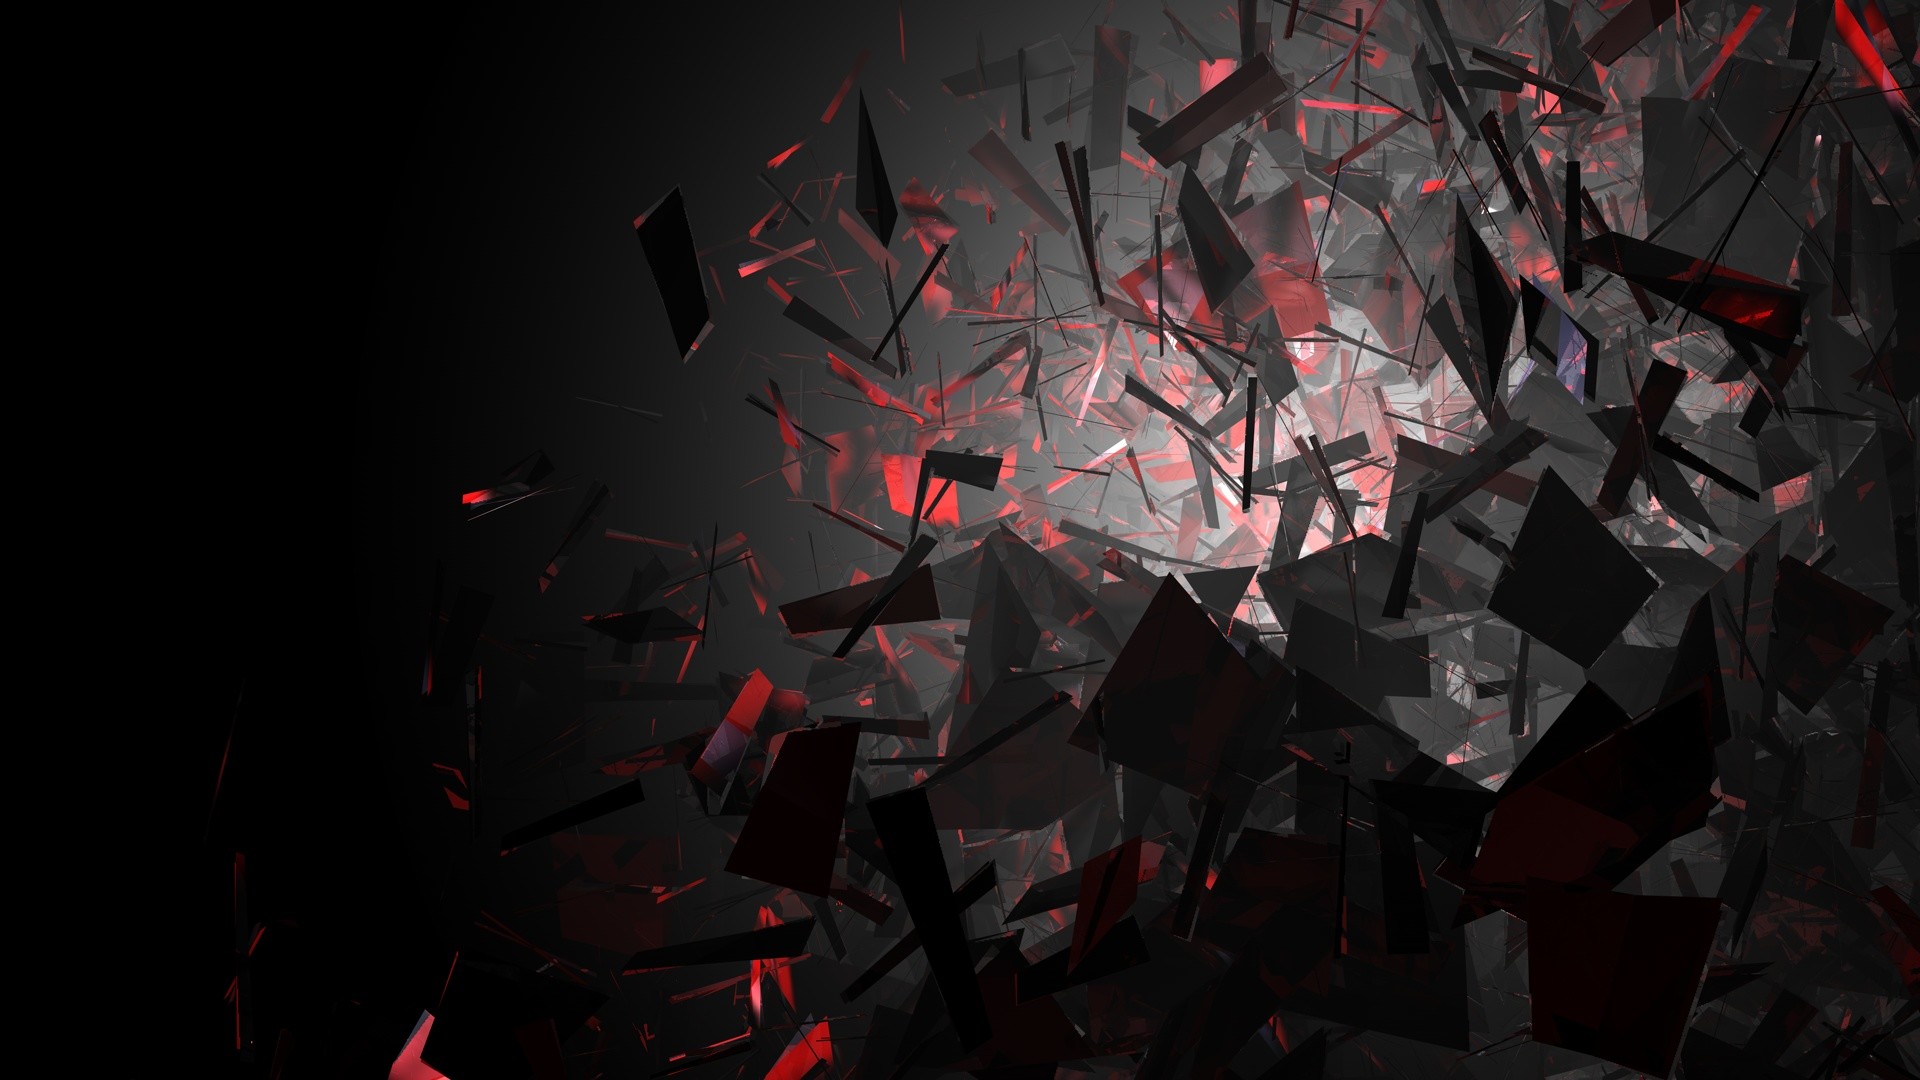 1920x1080 Red And Black Hd Backgrounds 1 Wide Wallpaper. Red And Black Hd Backgrounds  1 Wide Wallpaper